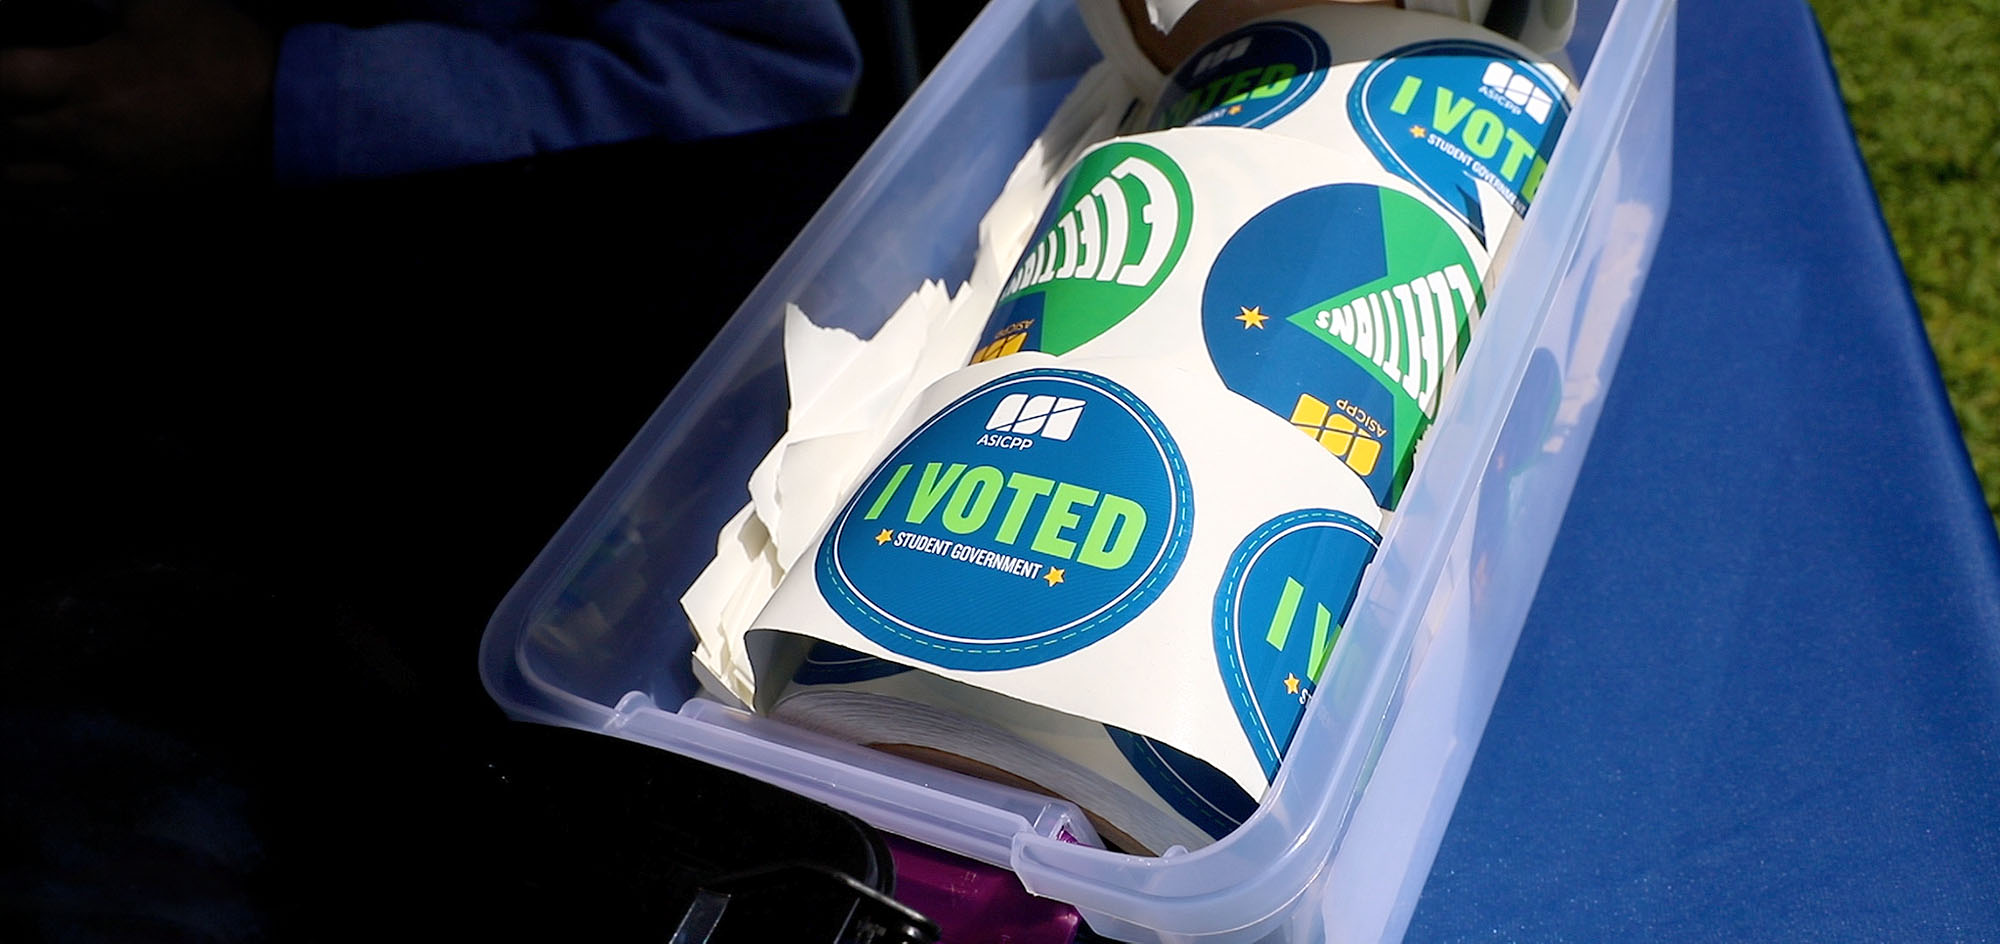 I voted stickers in a plastic bin